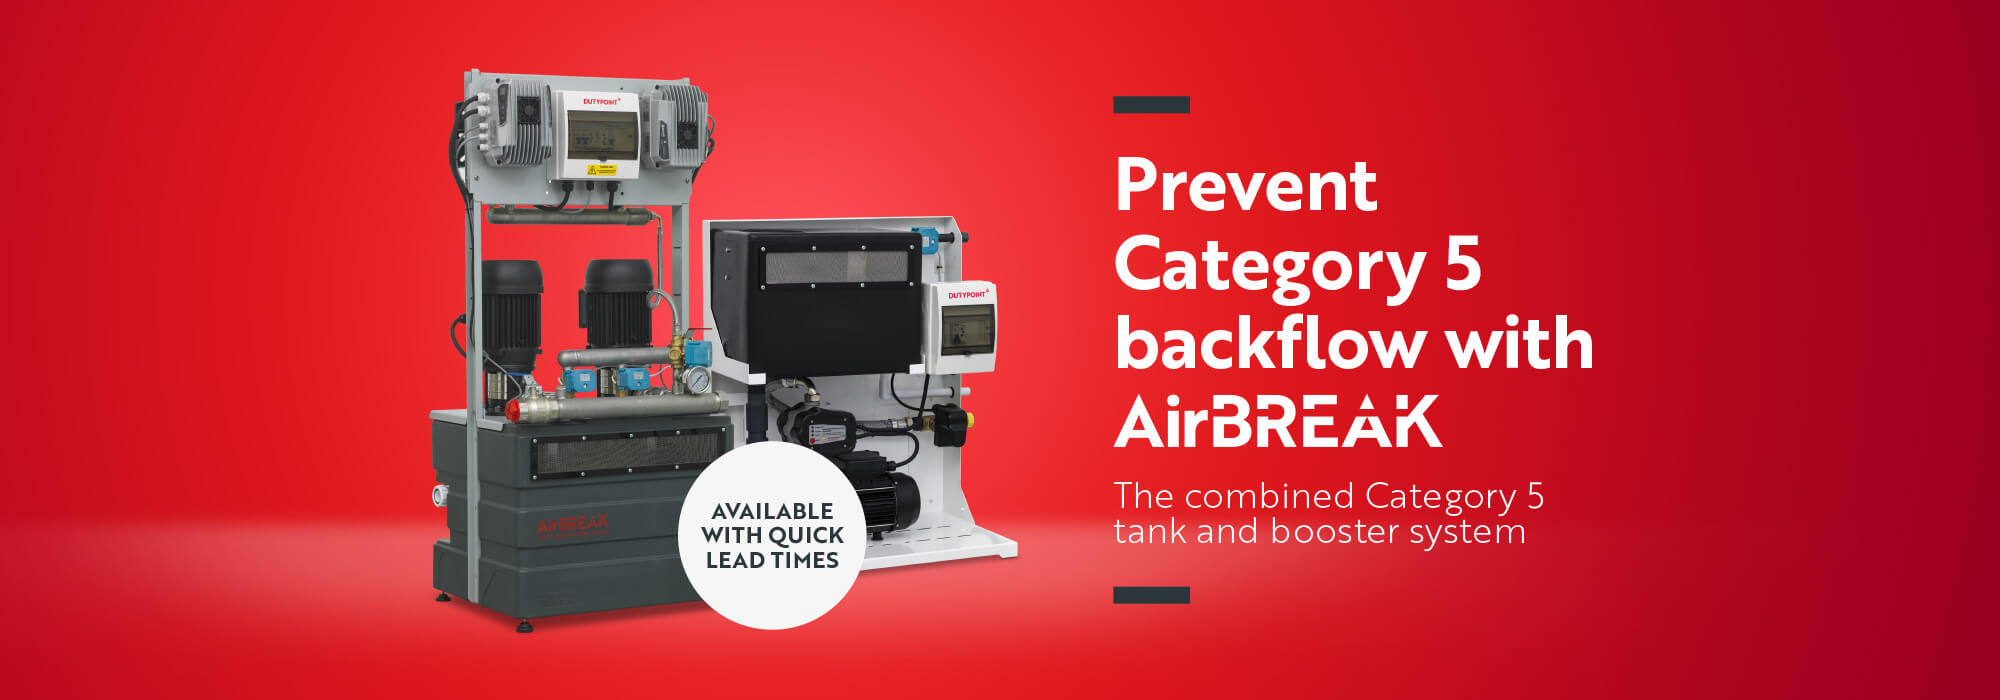 Prevent Category 5 backflow with AirBREAK